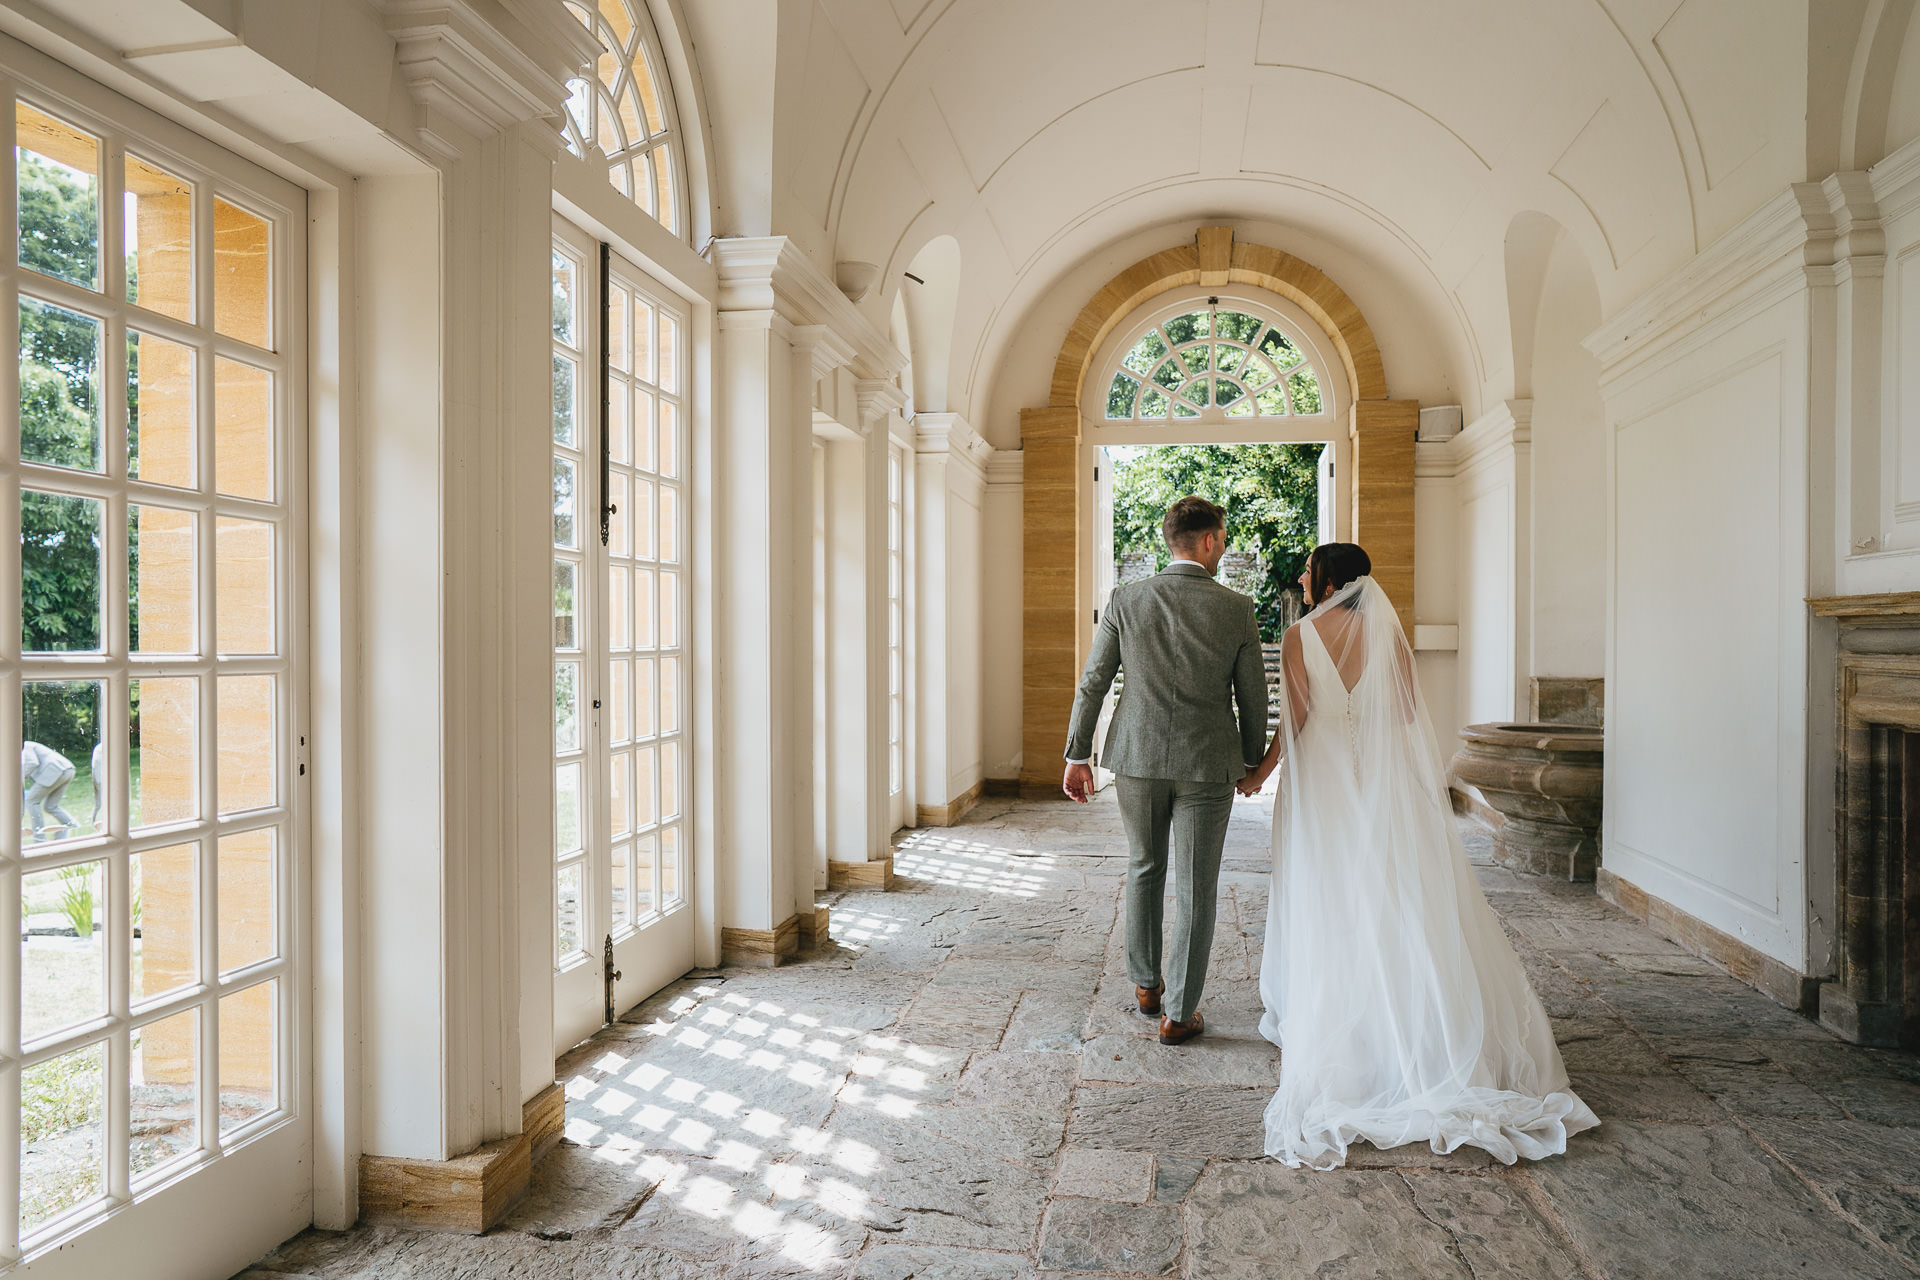 A bride and groom walking together through the orangery at Hestercombe